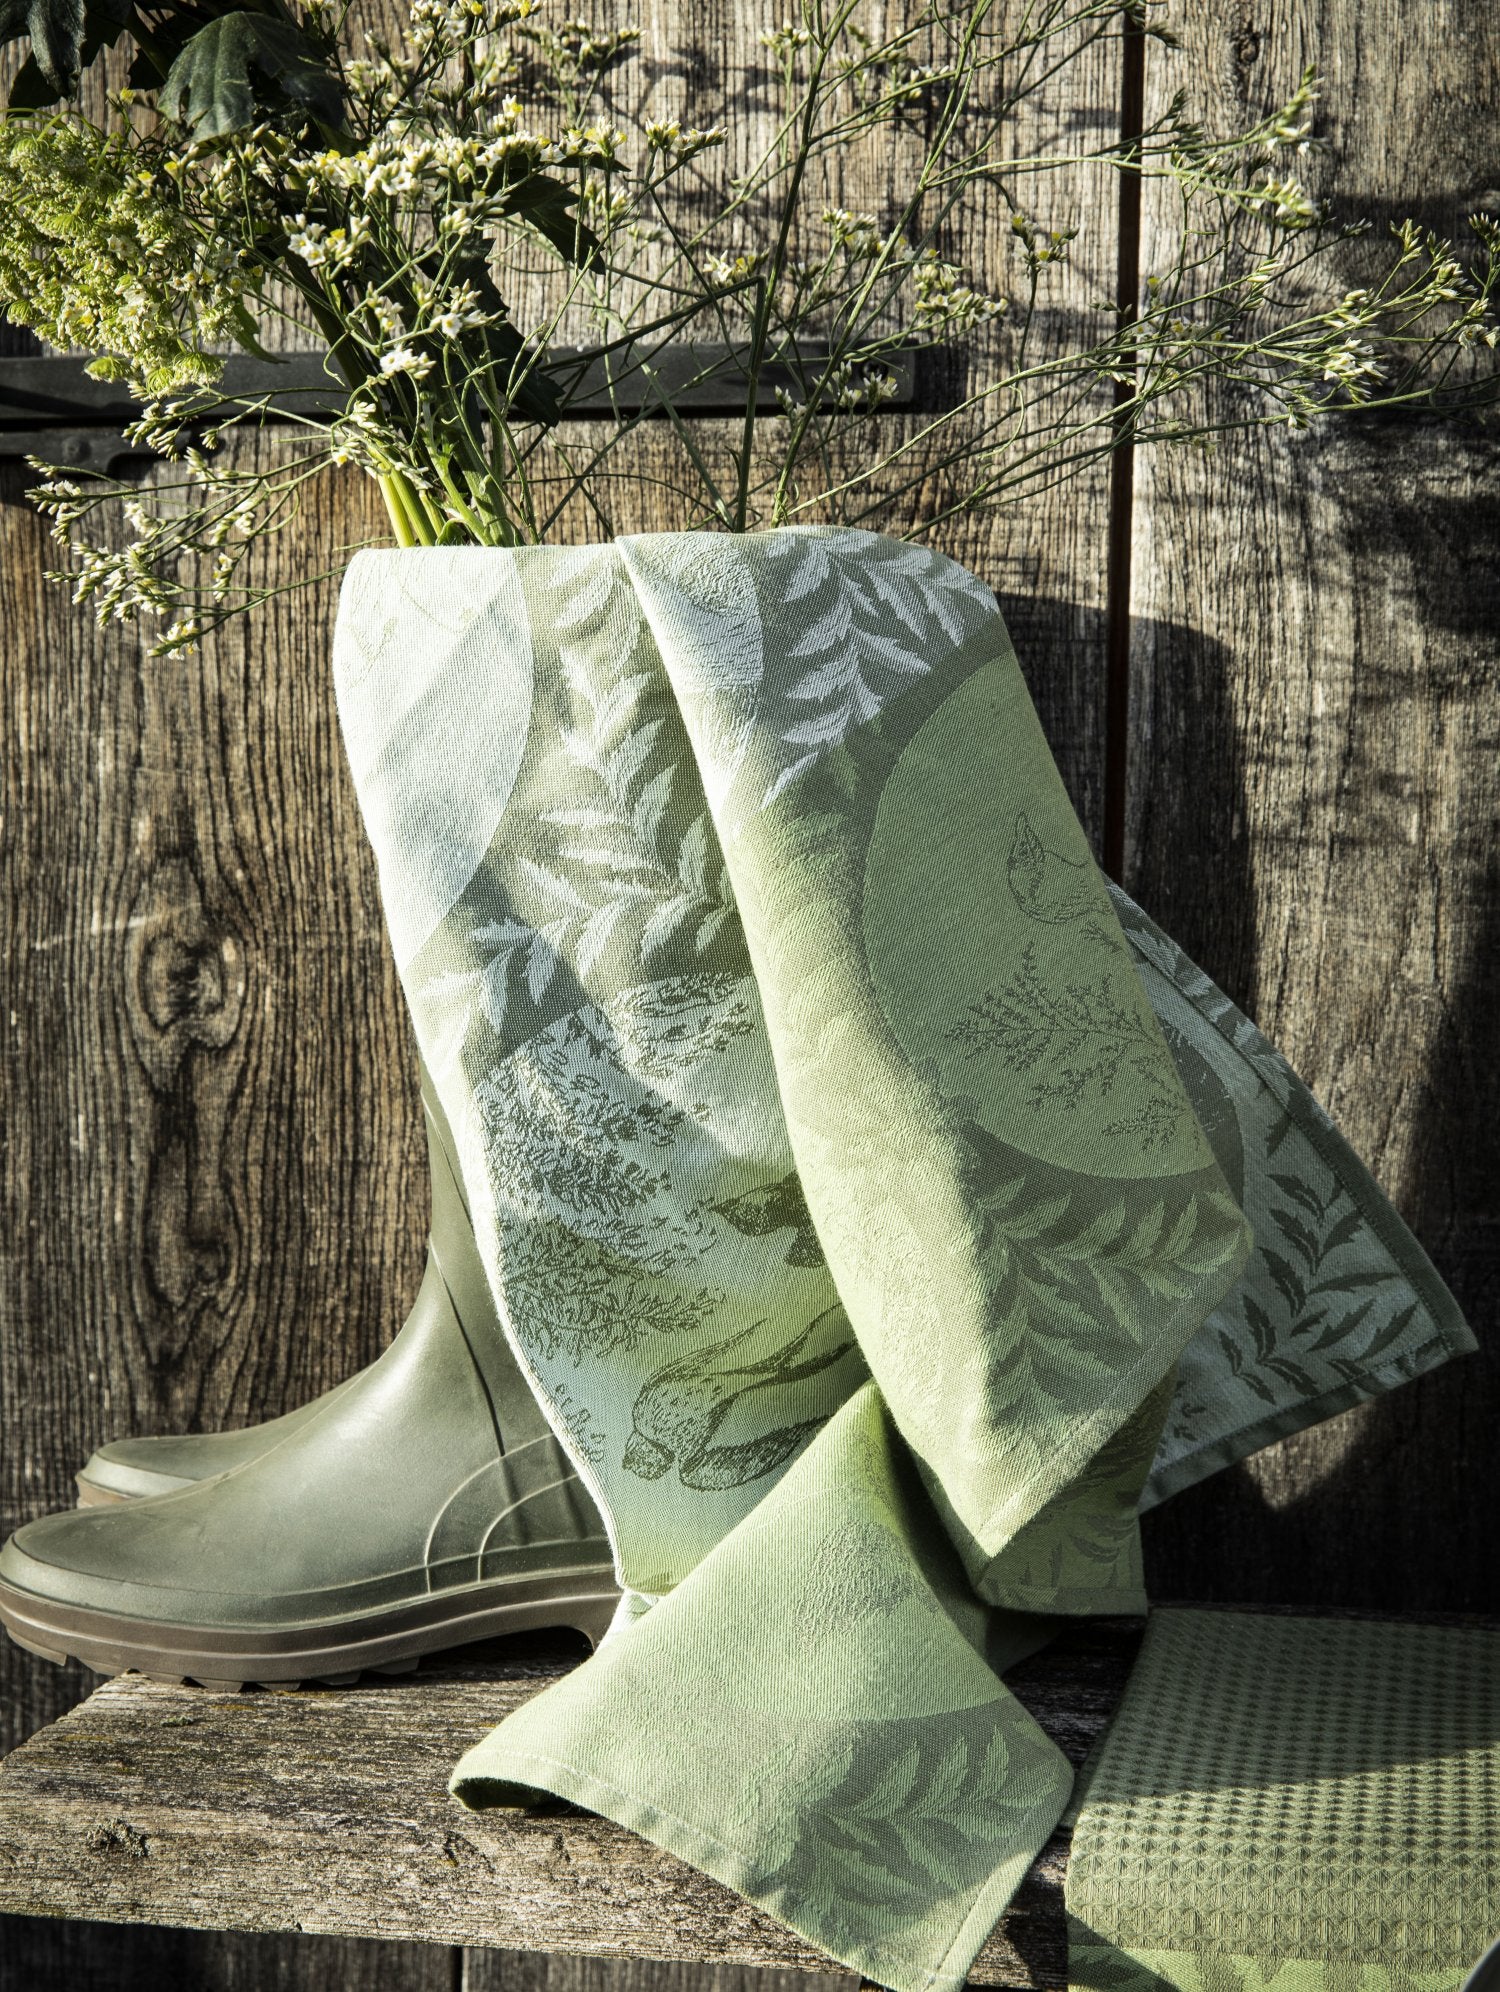 Jacquard Francais "Josephine" (Green), Woven cotton hand towel. Made in France.